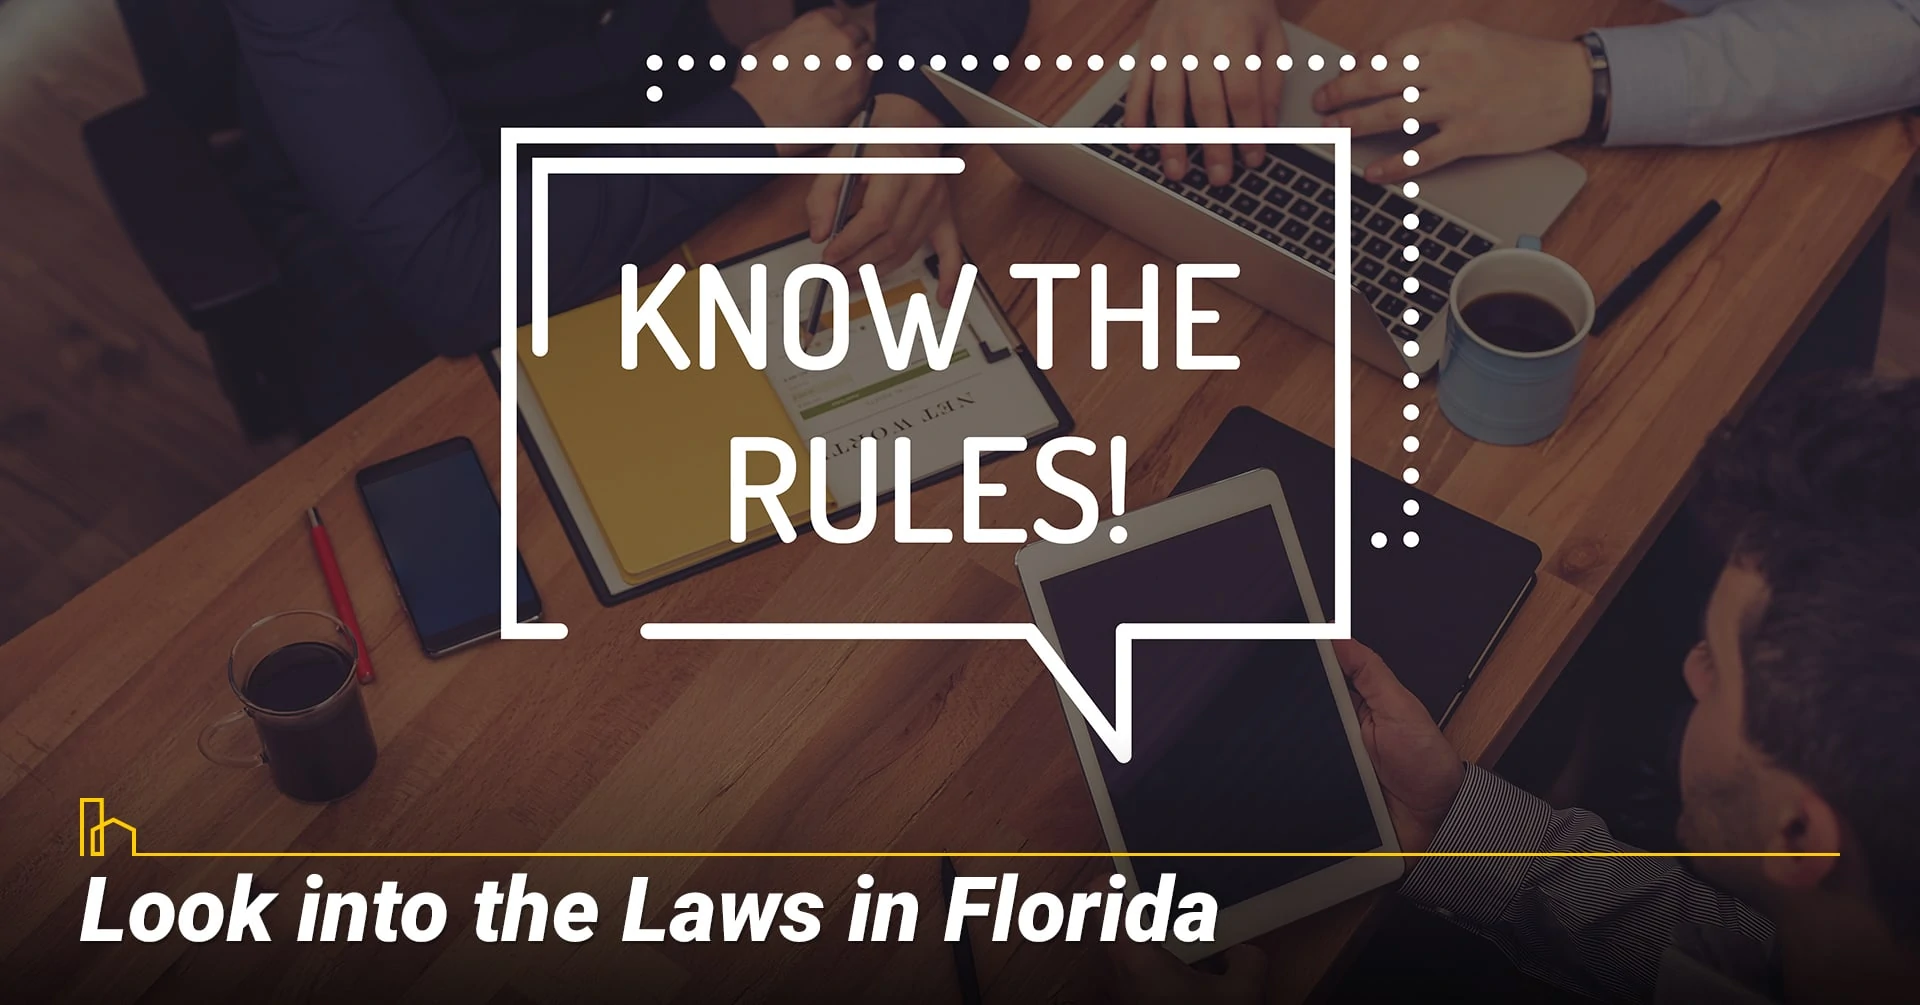 Look into the Laws in Florida, learn about local laws